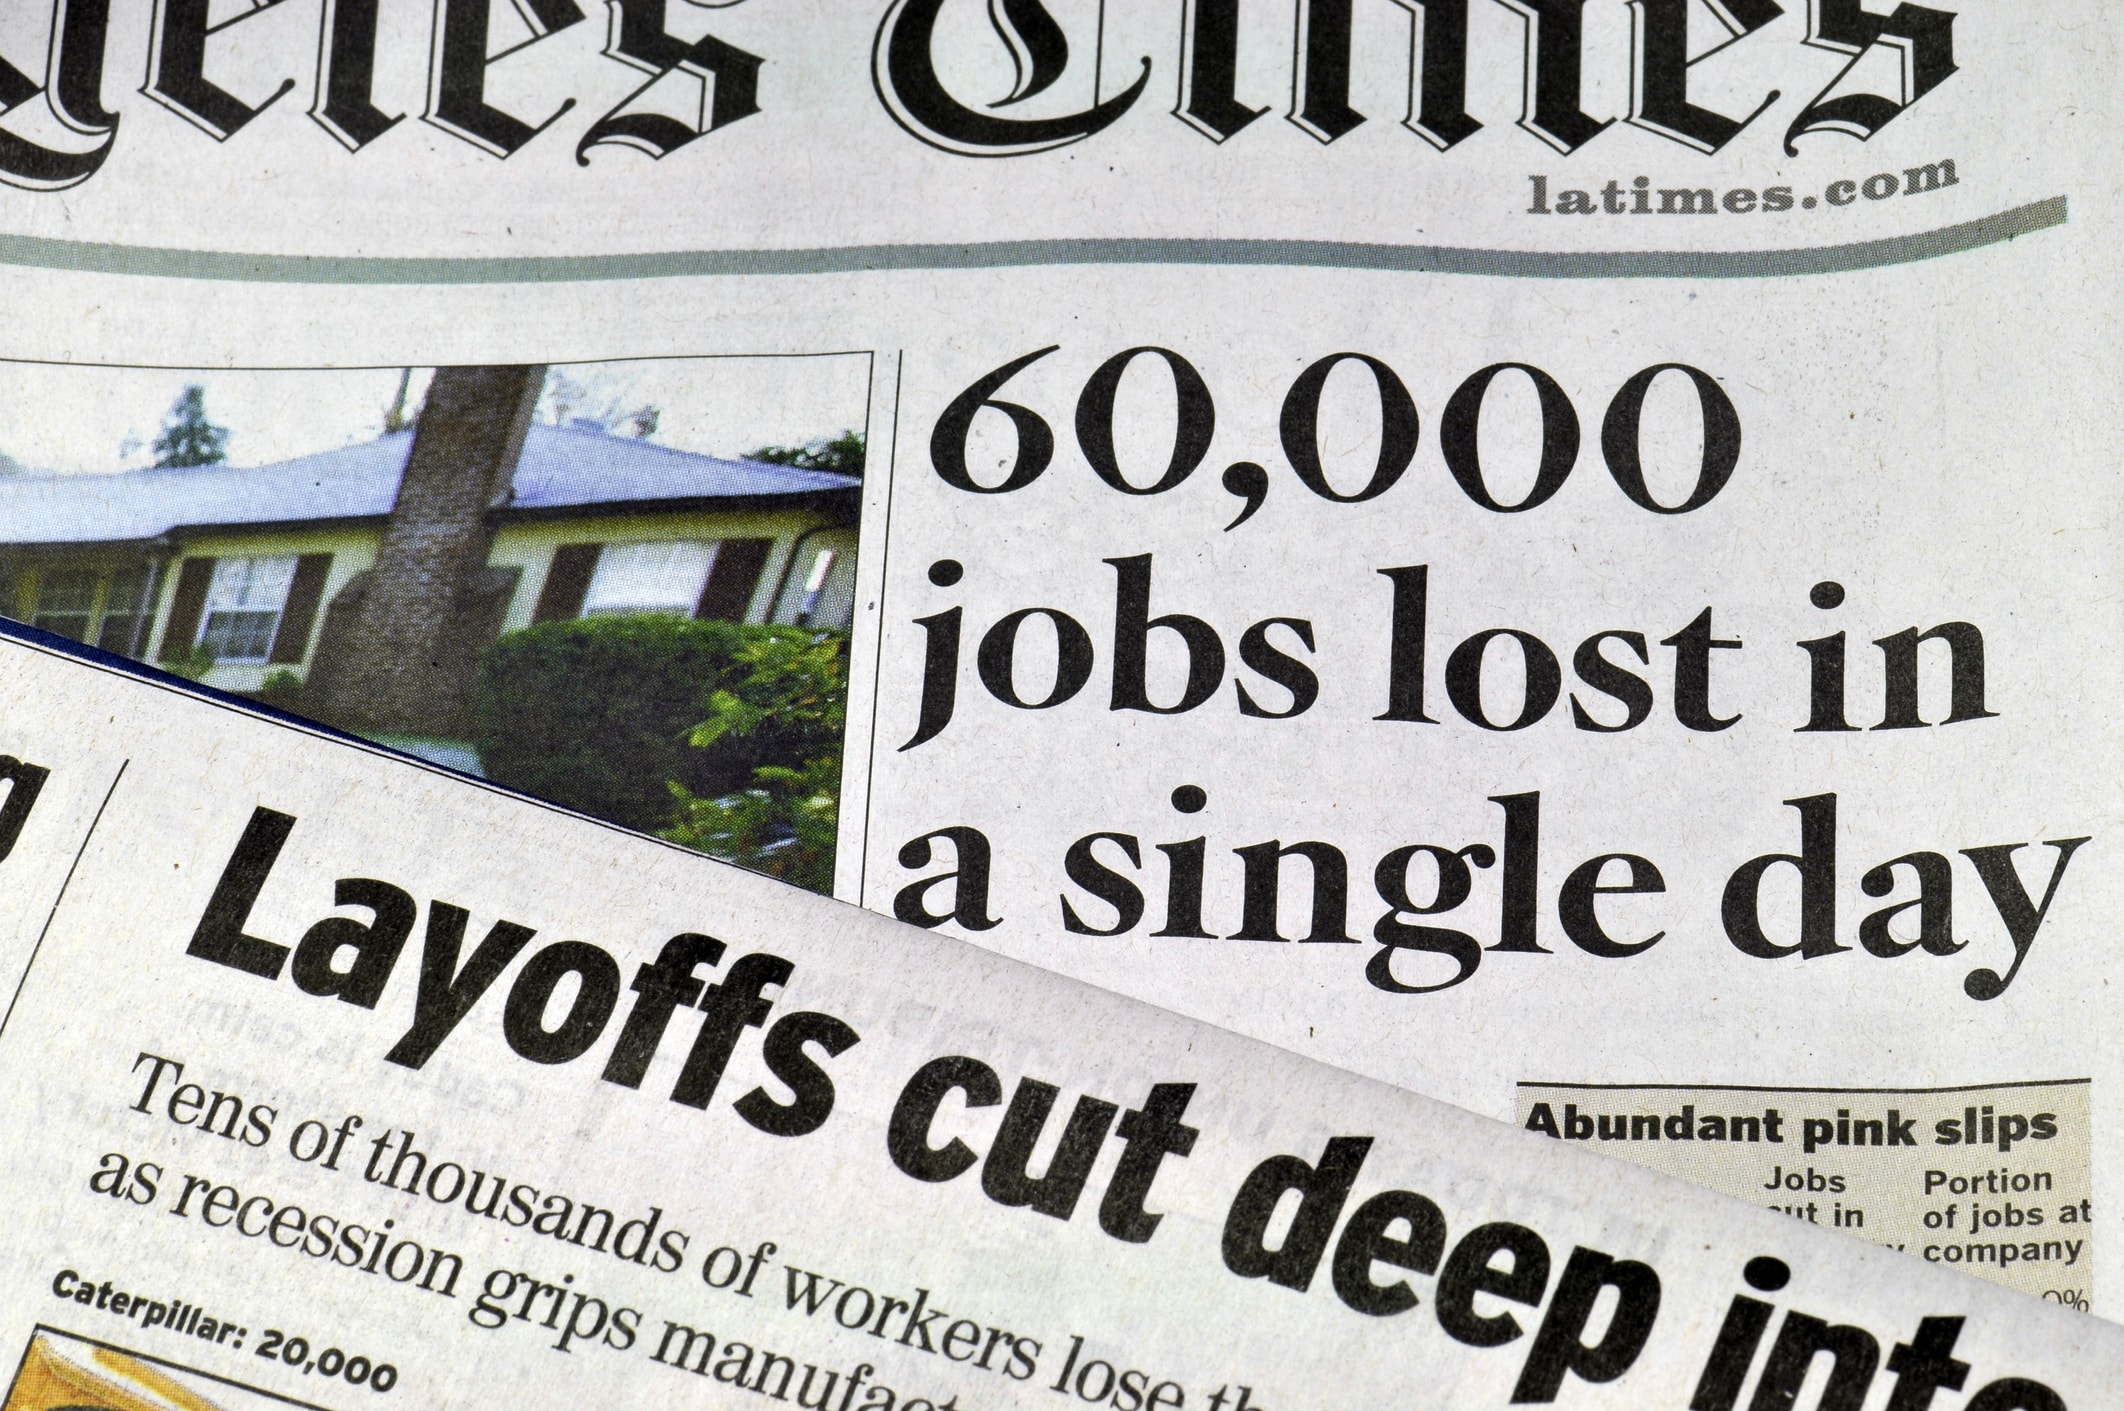 Los Angeles, California, USA - January 27, 2009: Two sets of newspaper headlines, one from the Los Angeles Times documents massives job losses and layoffs. The recession that began in 2008 has continued for several years.